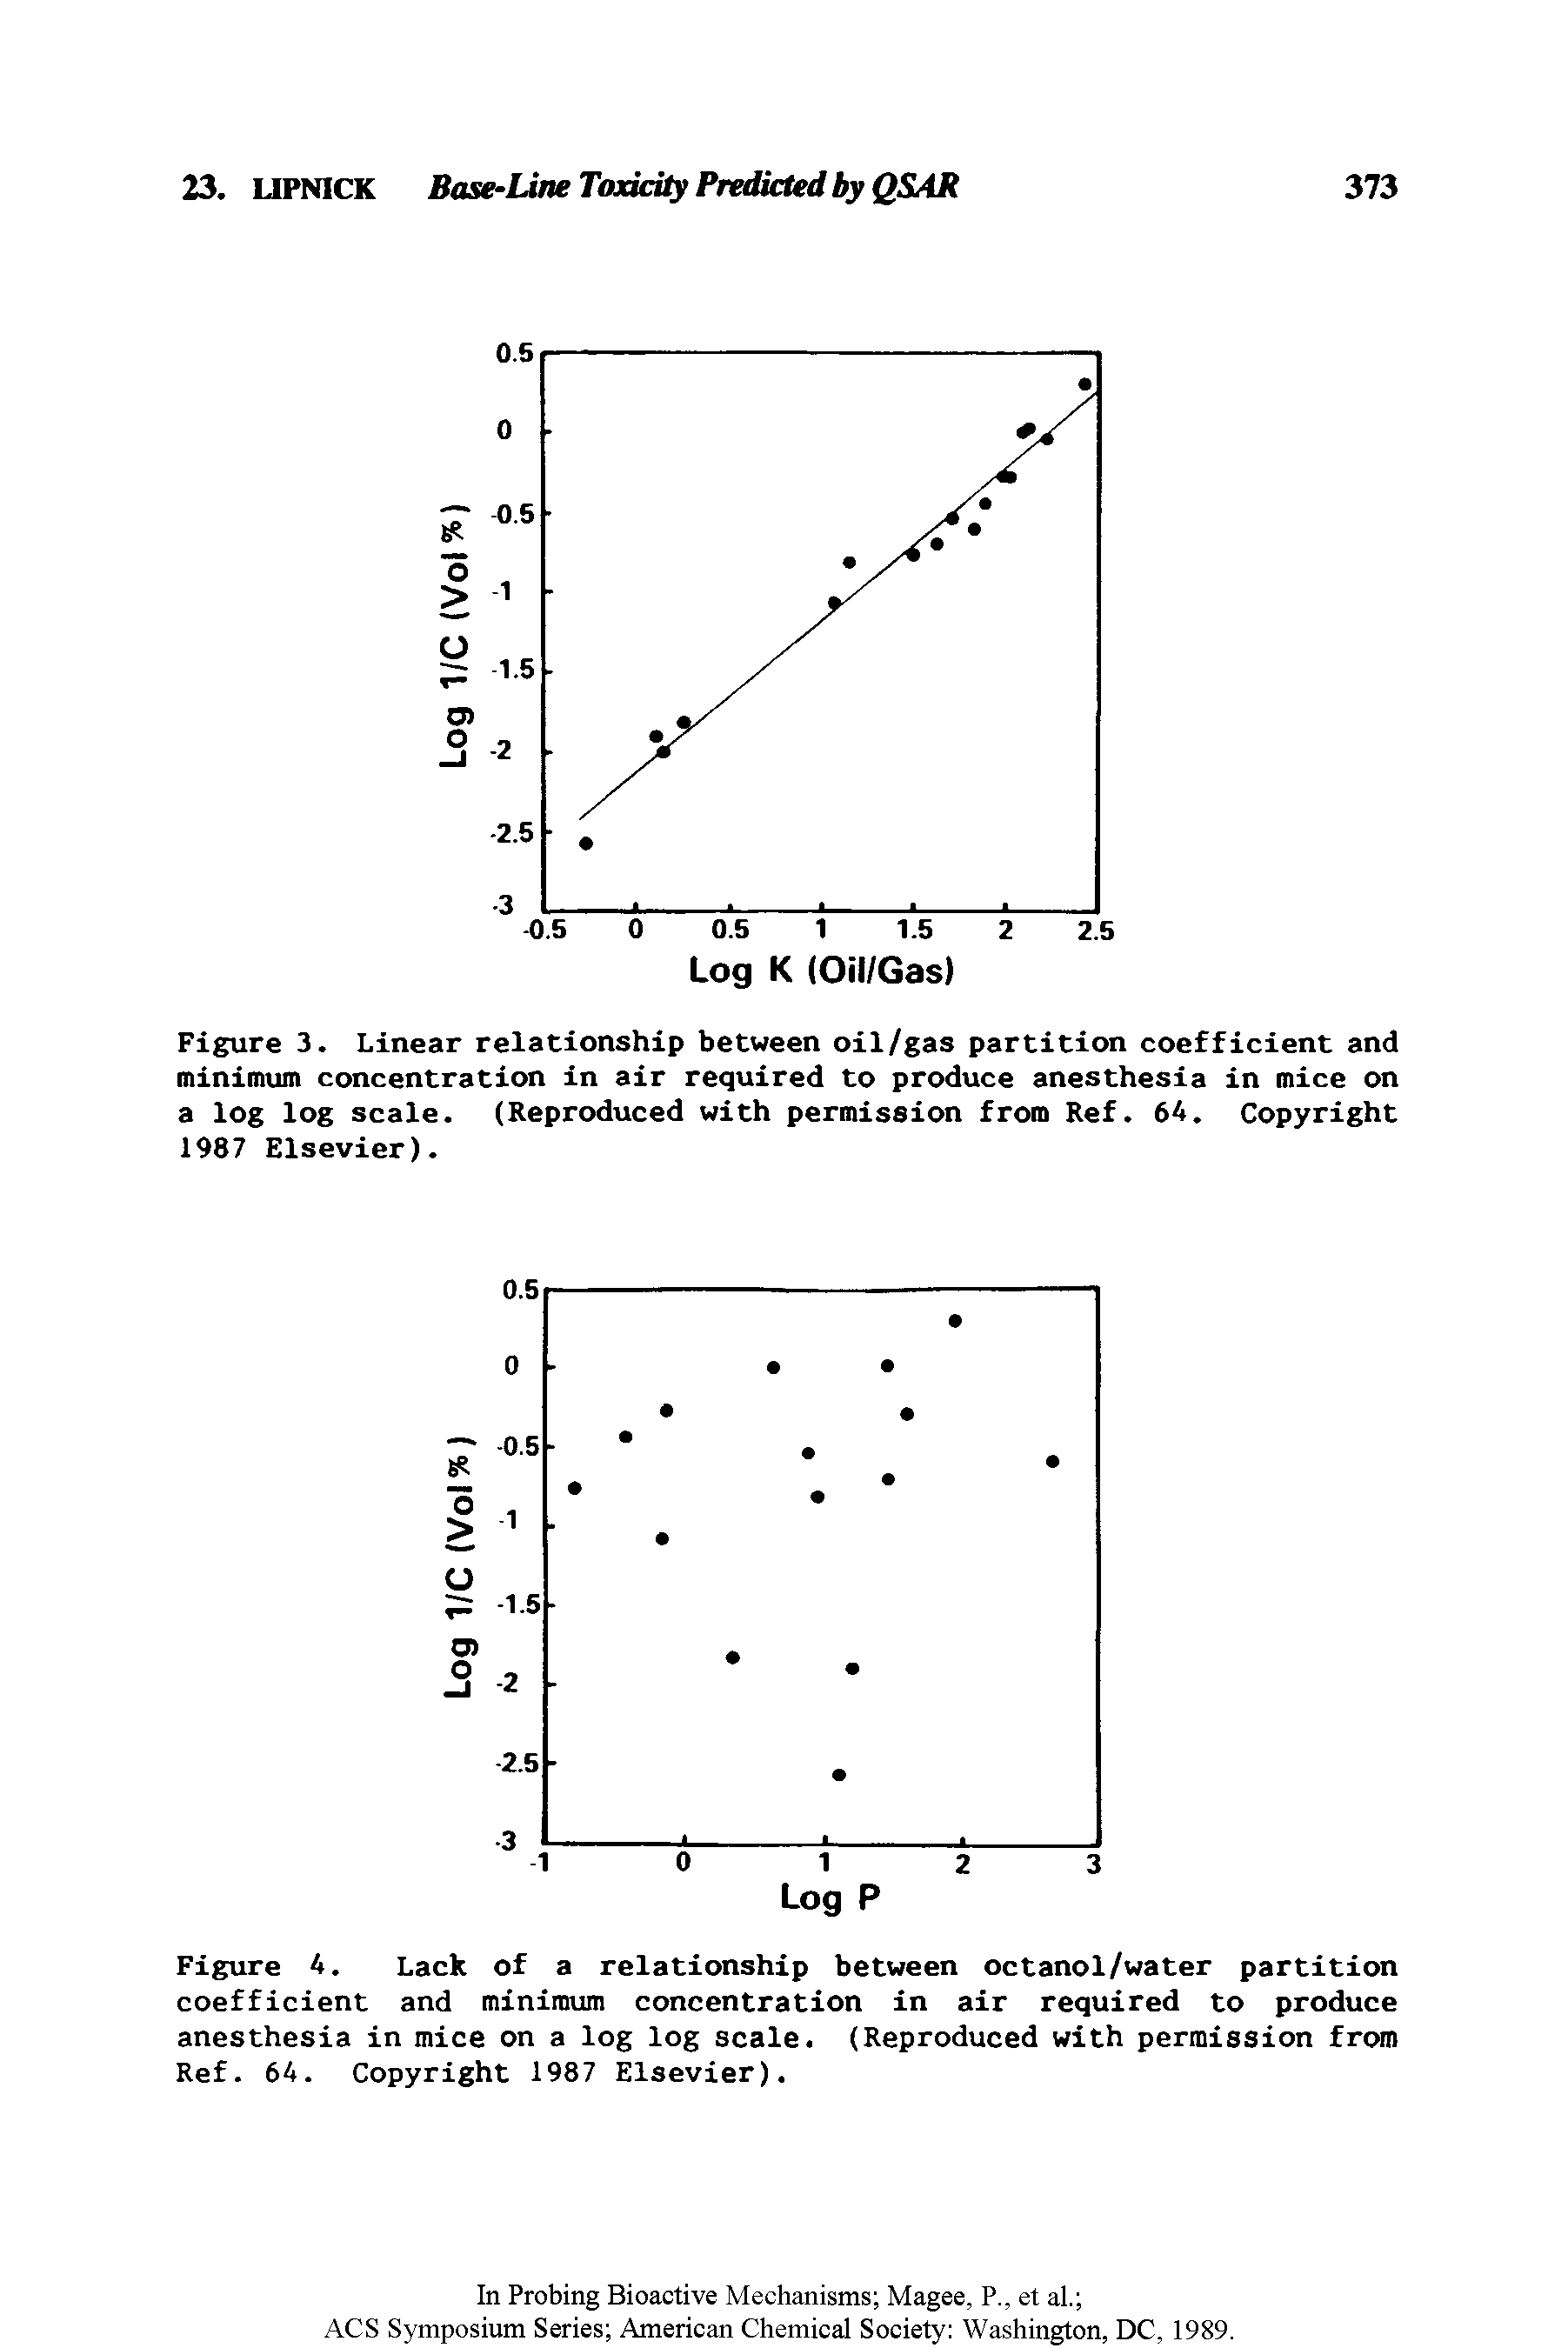 Figure 3. Linear relationship between oil/gas partition coefficient and minimum concentration in air required to produce anesthesia in mice on a log log scale. (Reproduced with permission from Ref. 64. Copyright 1987 Elsevier).